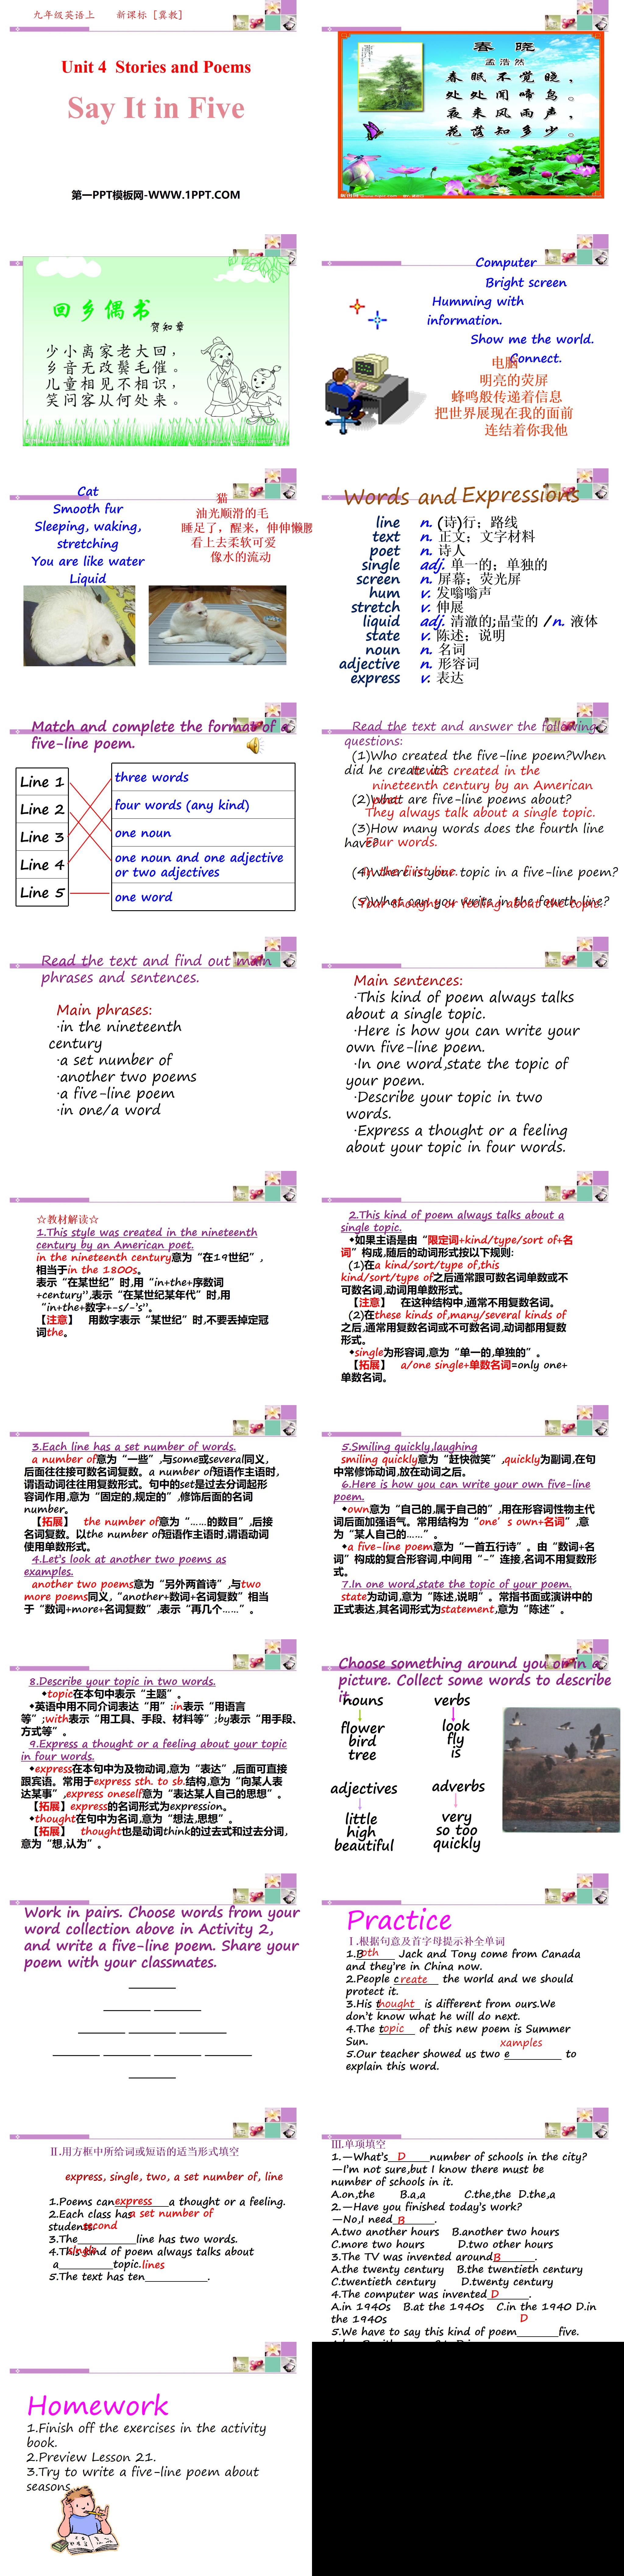 《Say It in Five》Stories and Poems PPT教学课件
（2）